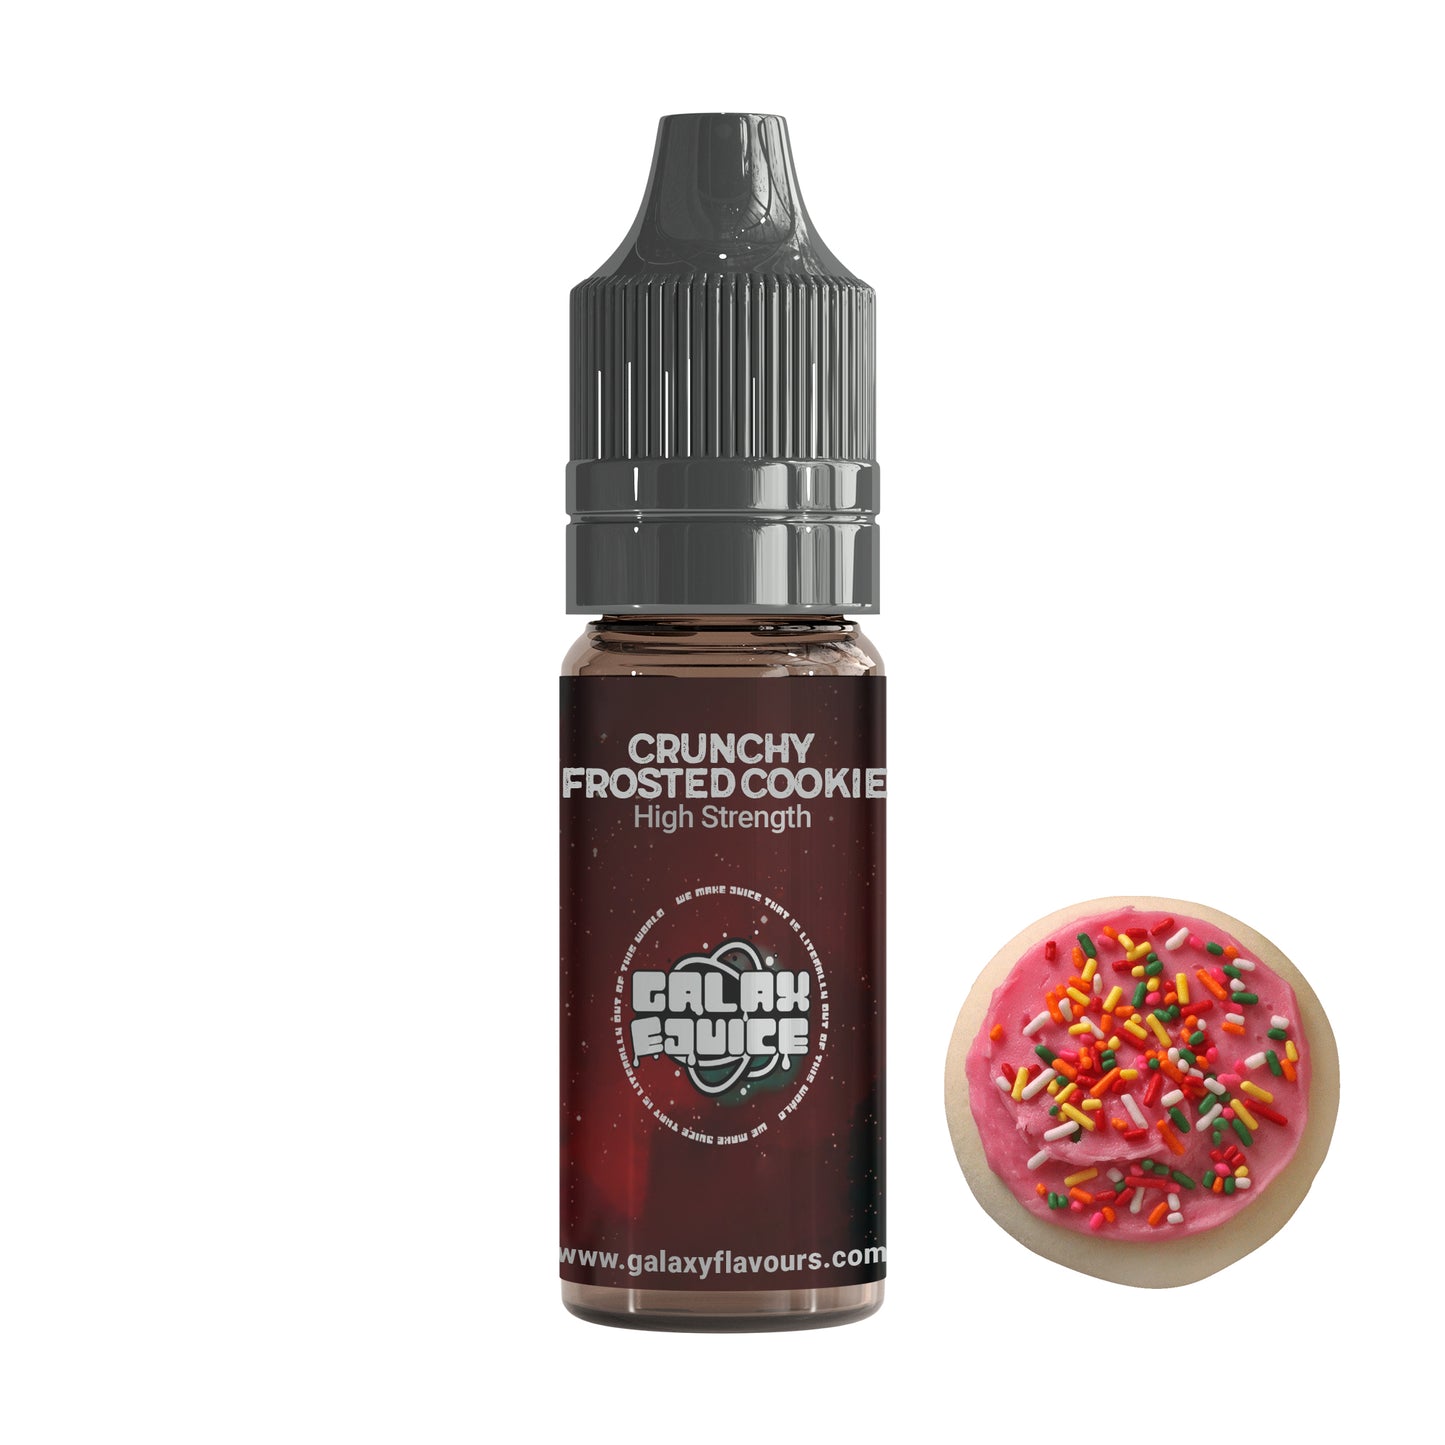 Crunchy Frosted Cookie High Strength Professional Flavouring.